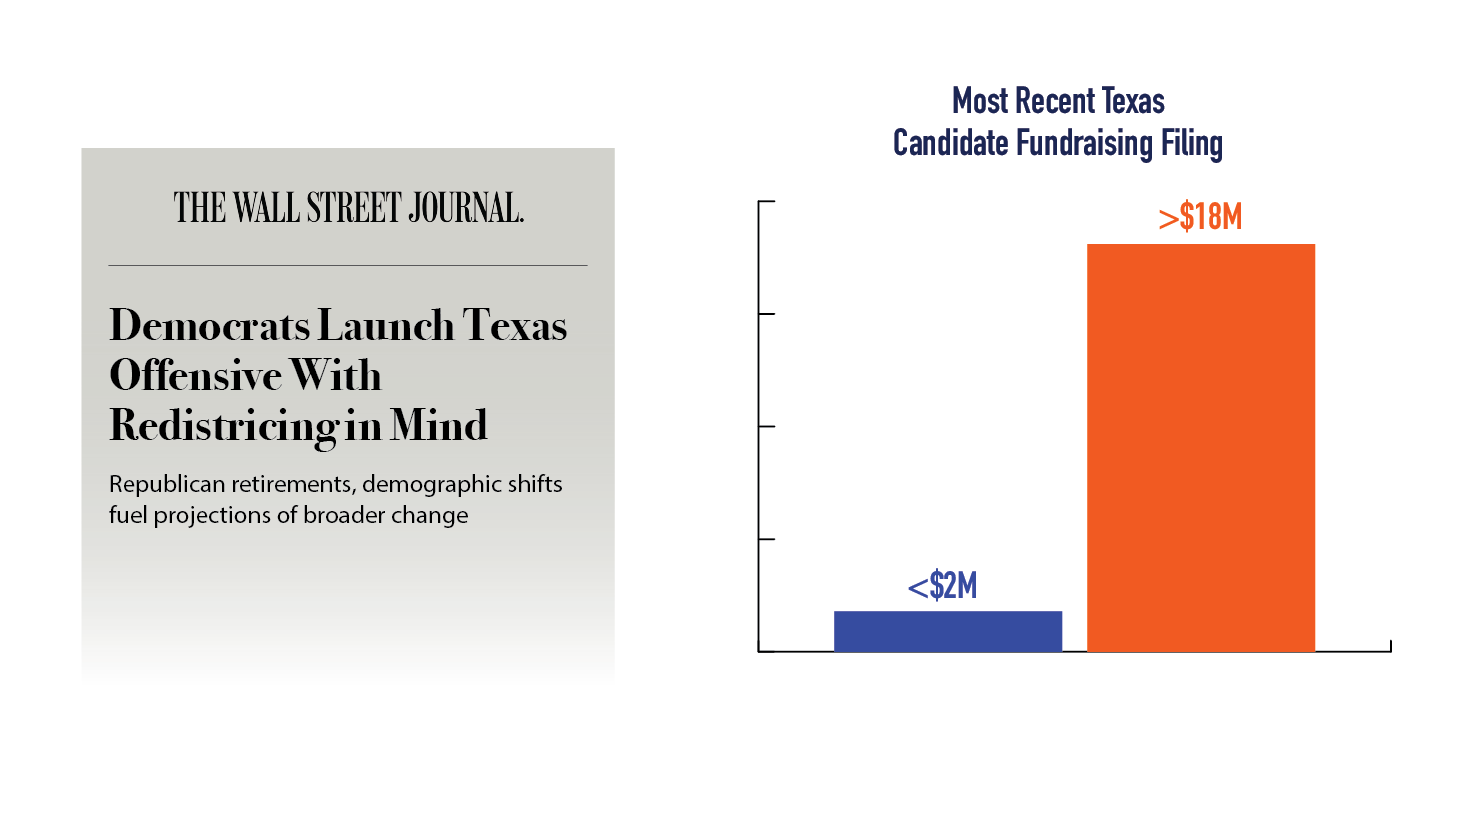 Rhetoric Is Not RealityContrary to rhetoric in the press, Democrats continue to under-resource state legislative contests as seen in the most recent campaign finance filing in Texas.